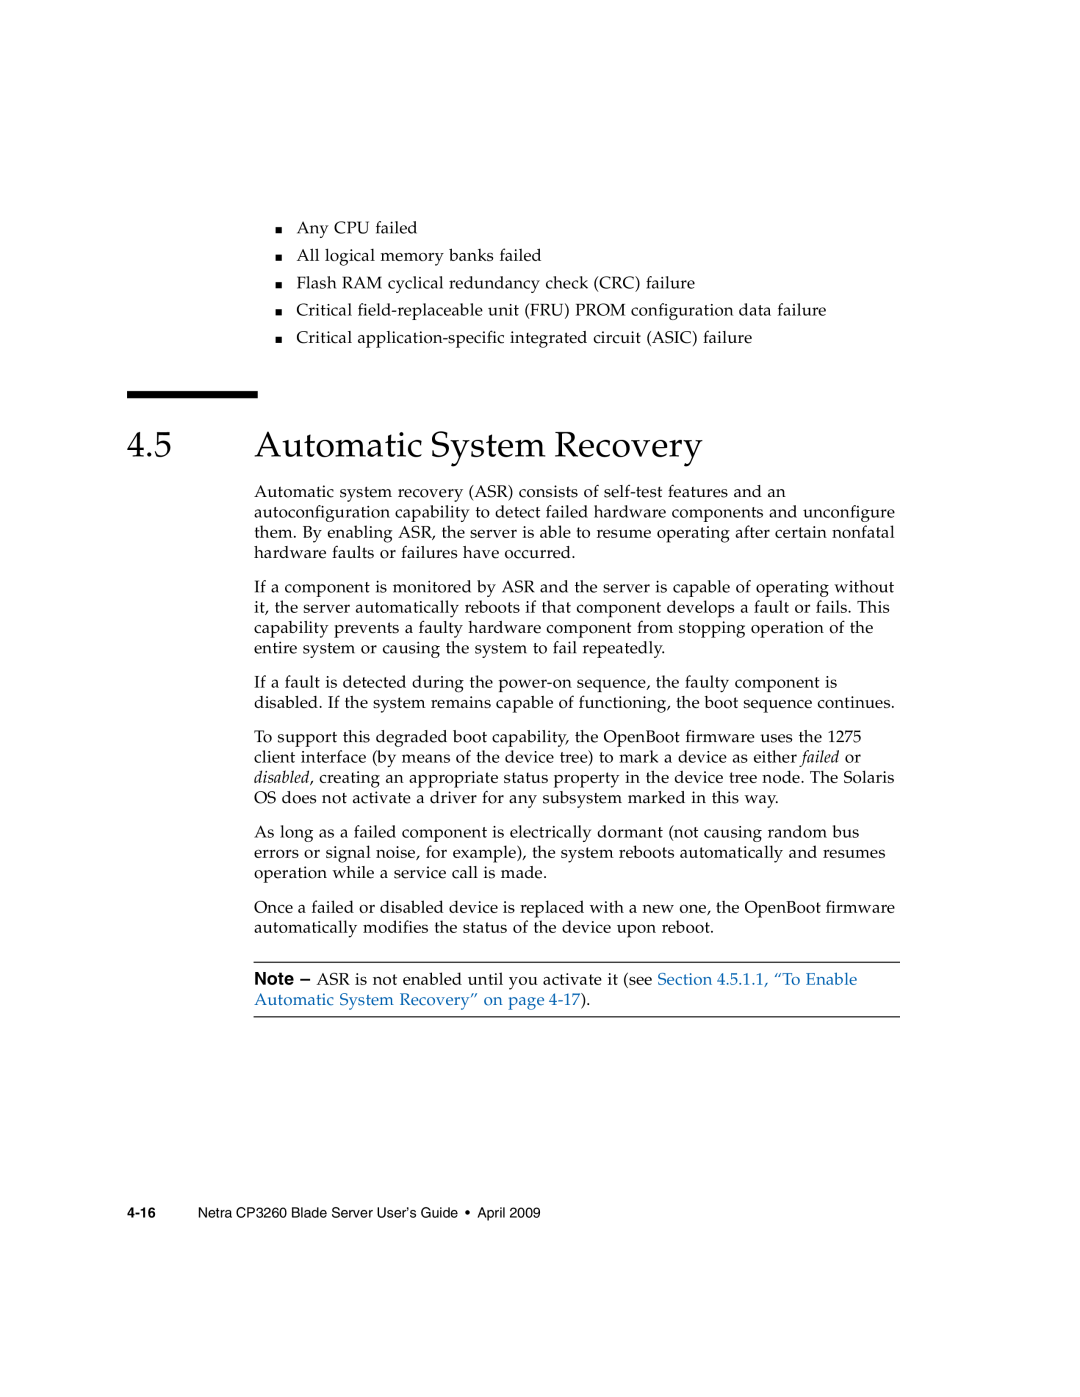 Sun Microsystems CP3260 manual Automatic System Recovery 